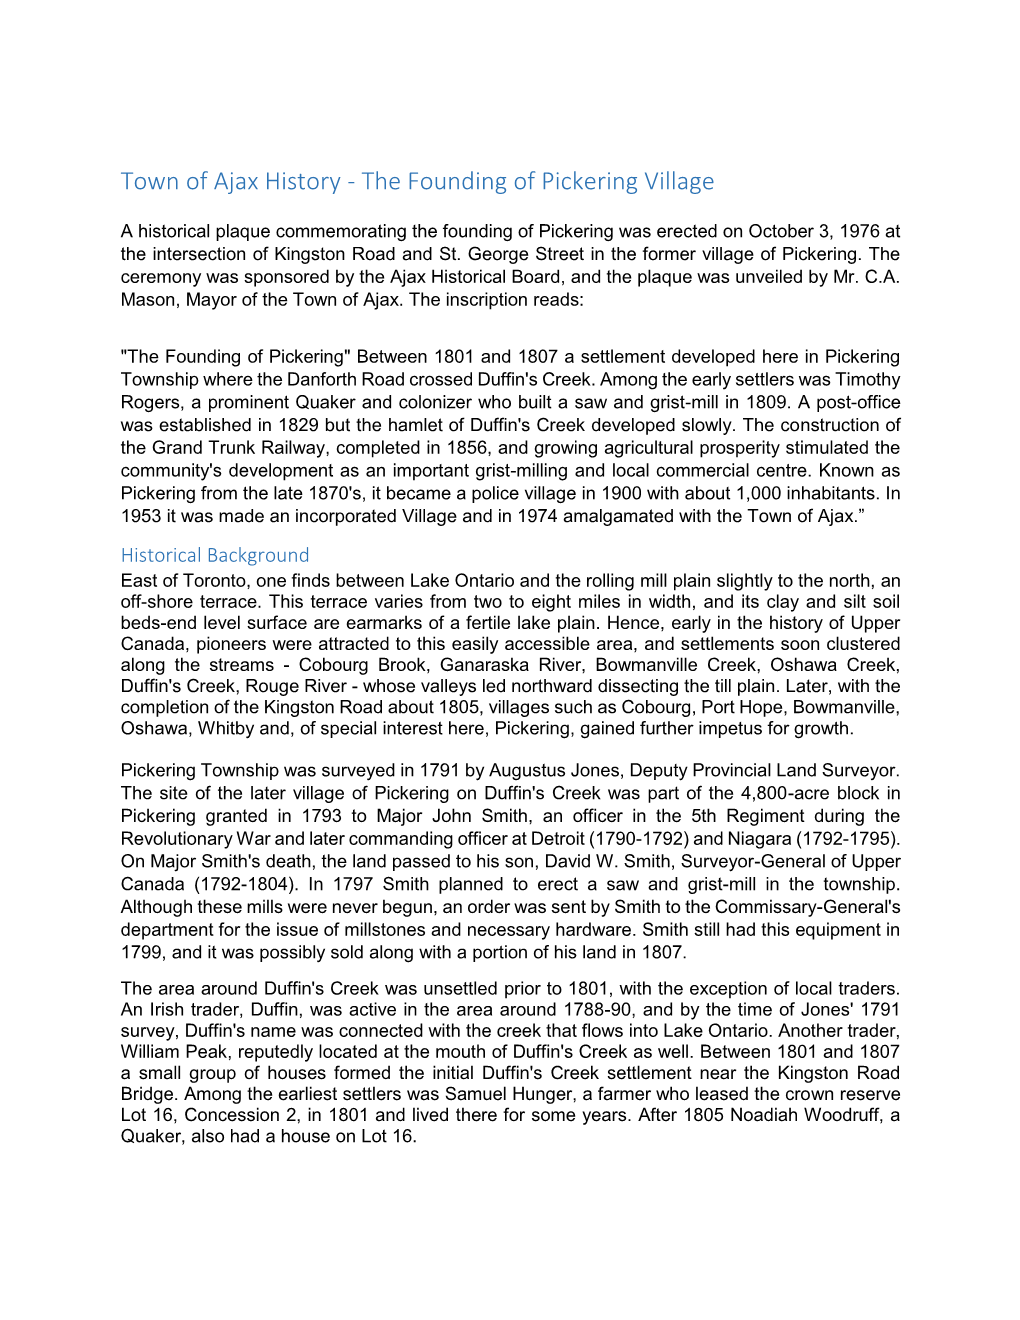 Town of Ajax History - the Founding of Pickering Village